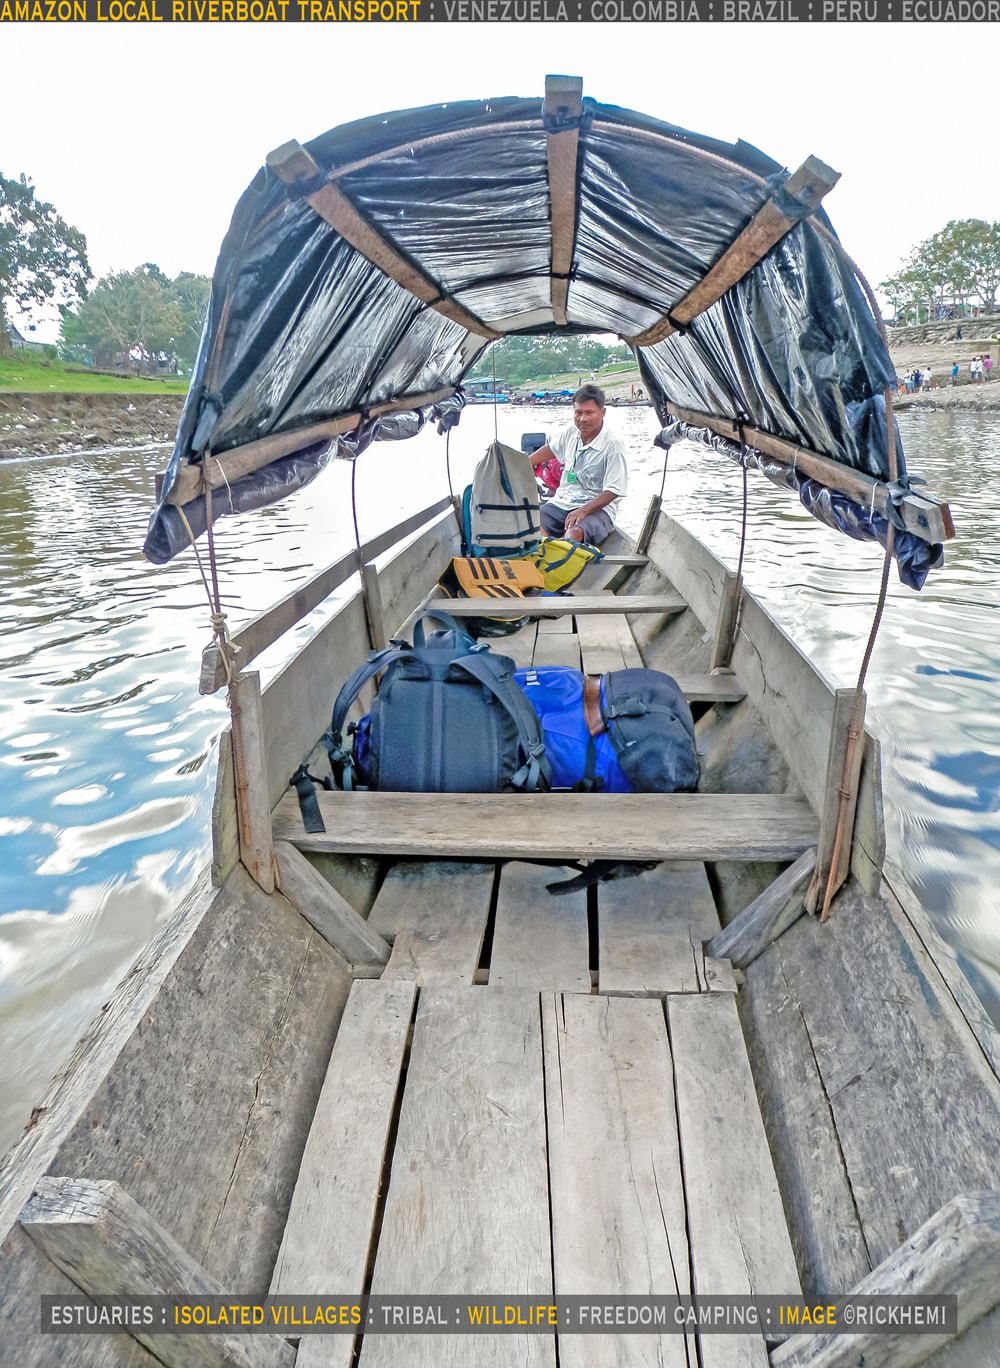 solo overland travel and transit, Amazon region, local private riverboat transport, wilderness camping, connections up and down river, Brazil, Venezuela, Colombia, Peru, Ecuador, image by Rick Hemi